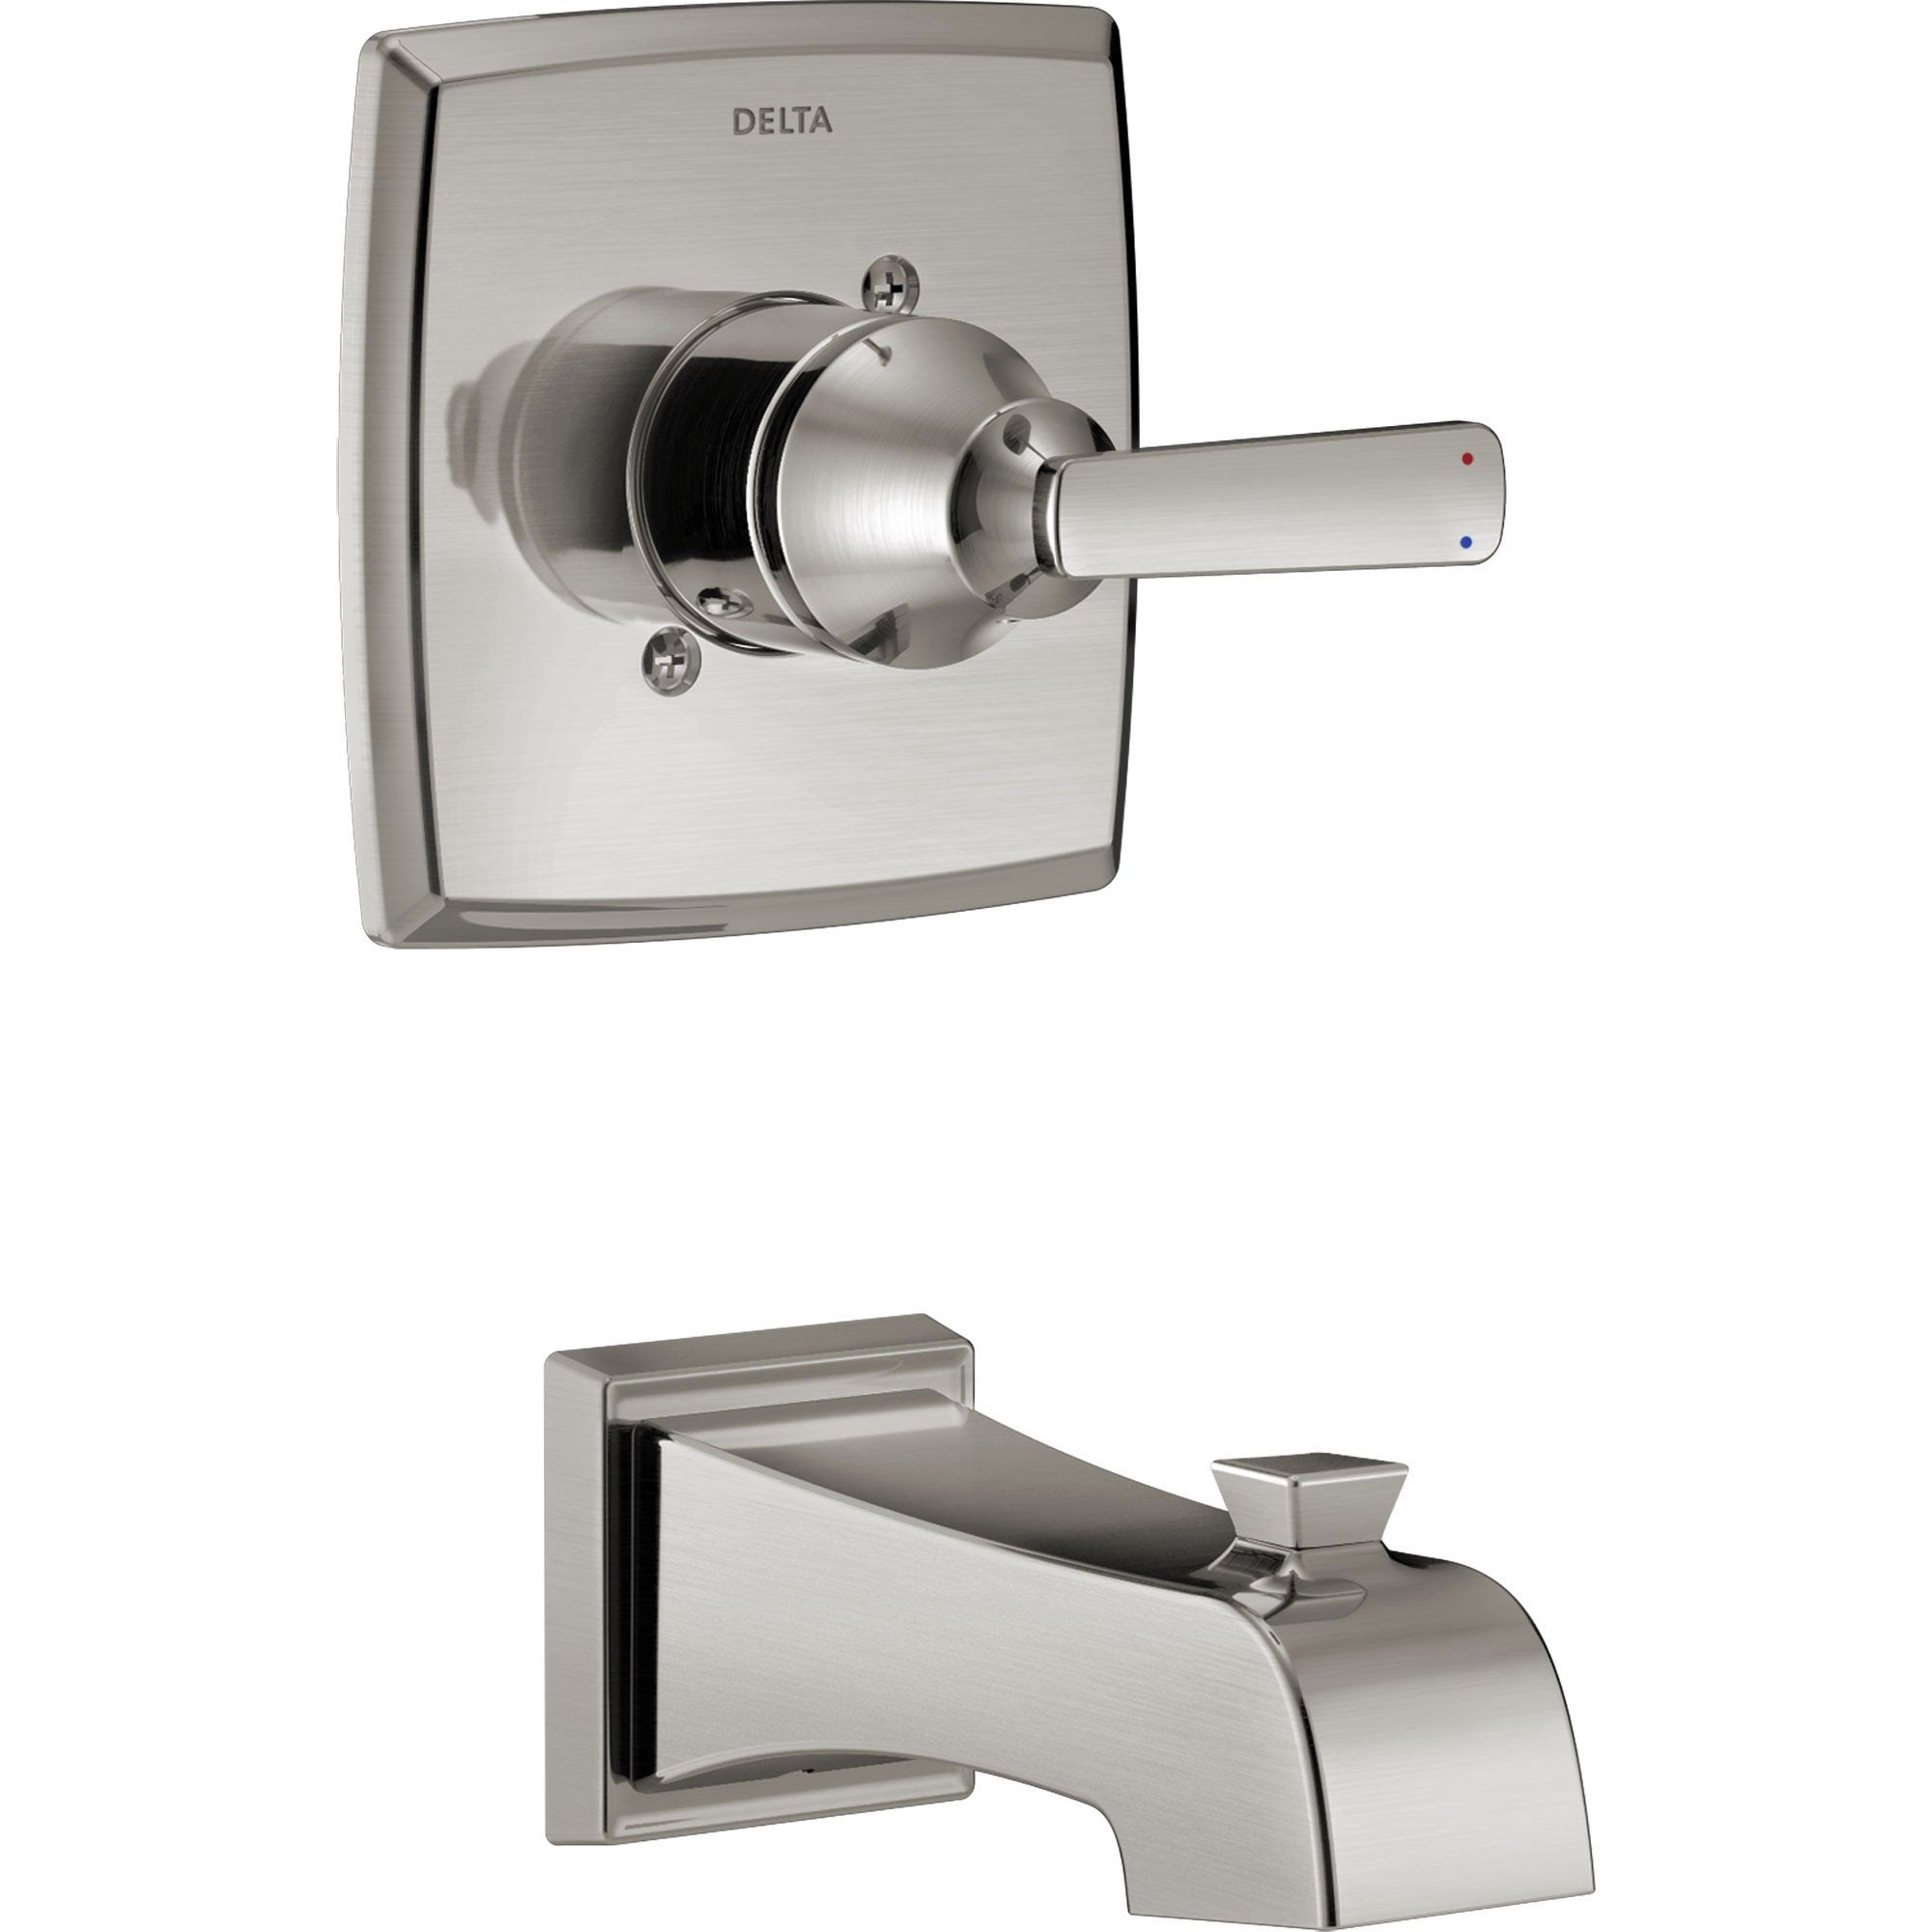 Delta Ashlyn Modern 14 Series Stainless Steel Finish Single Handle Wall Mounted Tub Only Faucet INCLUDES Rough-in Valve with Stops D1237V